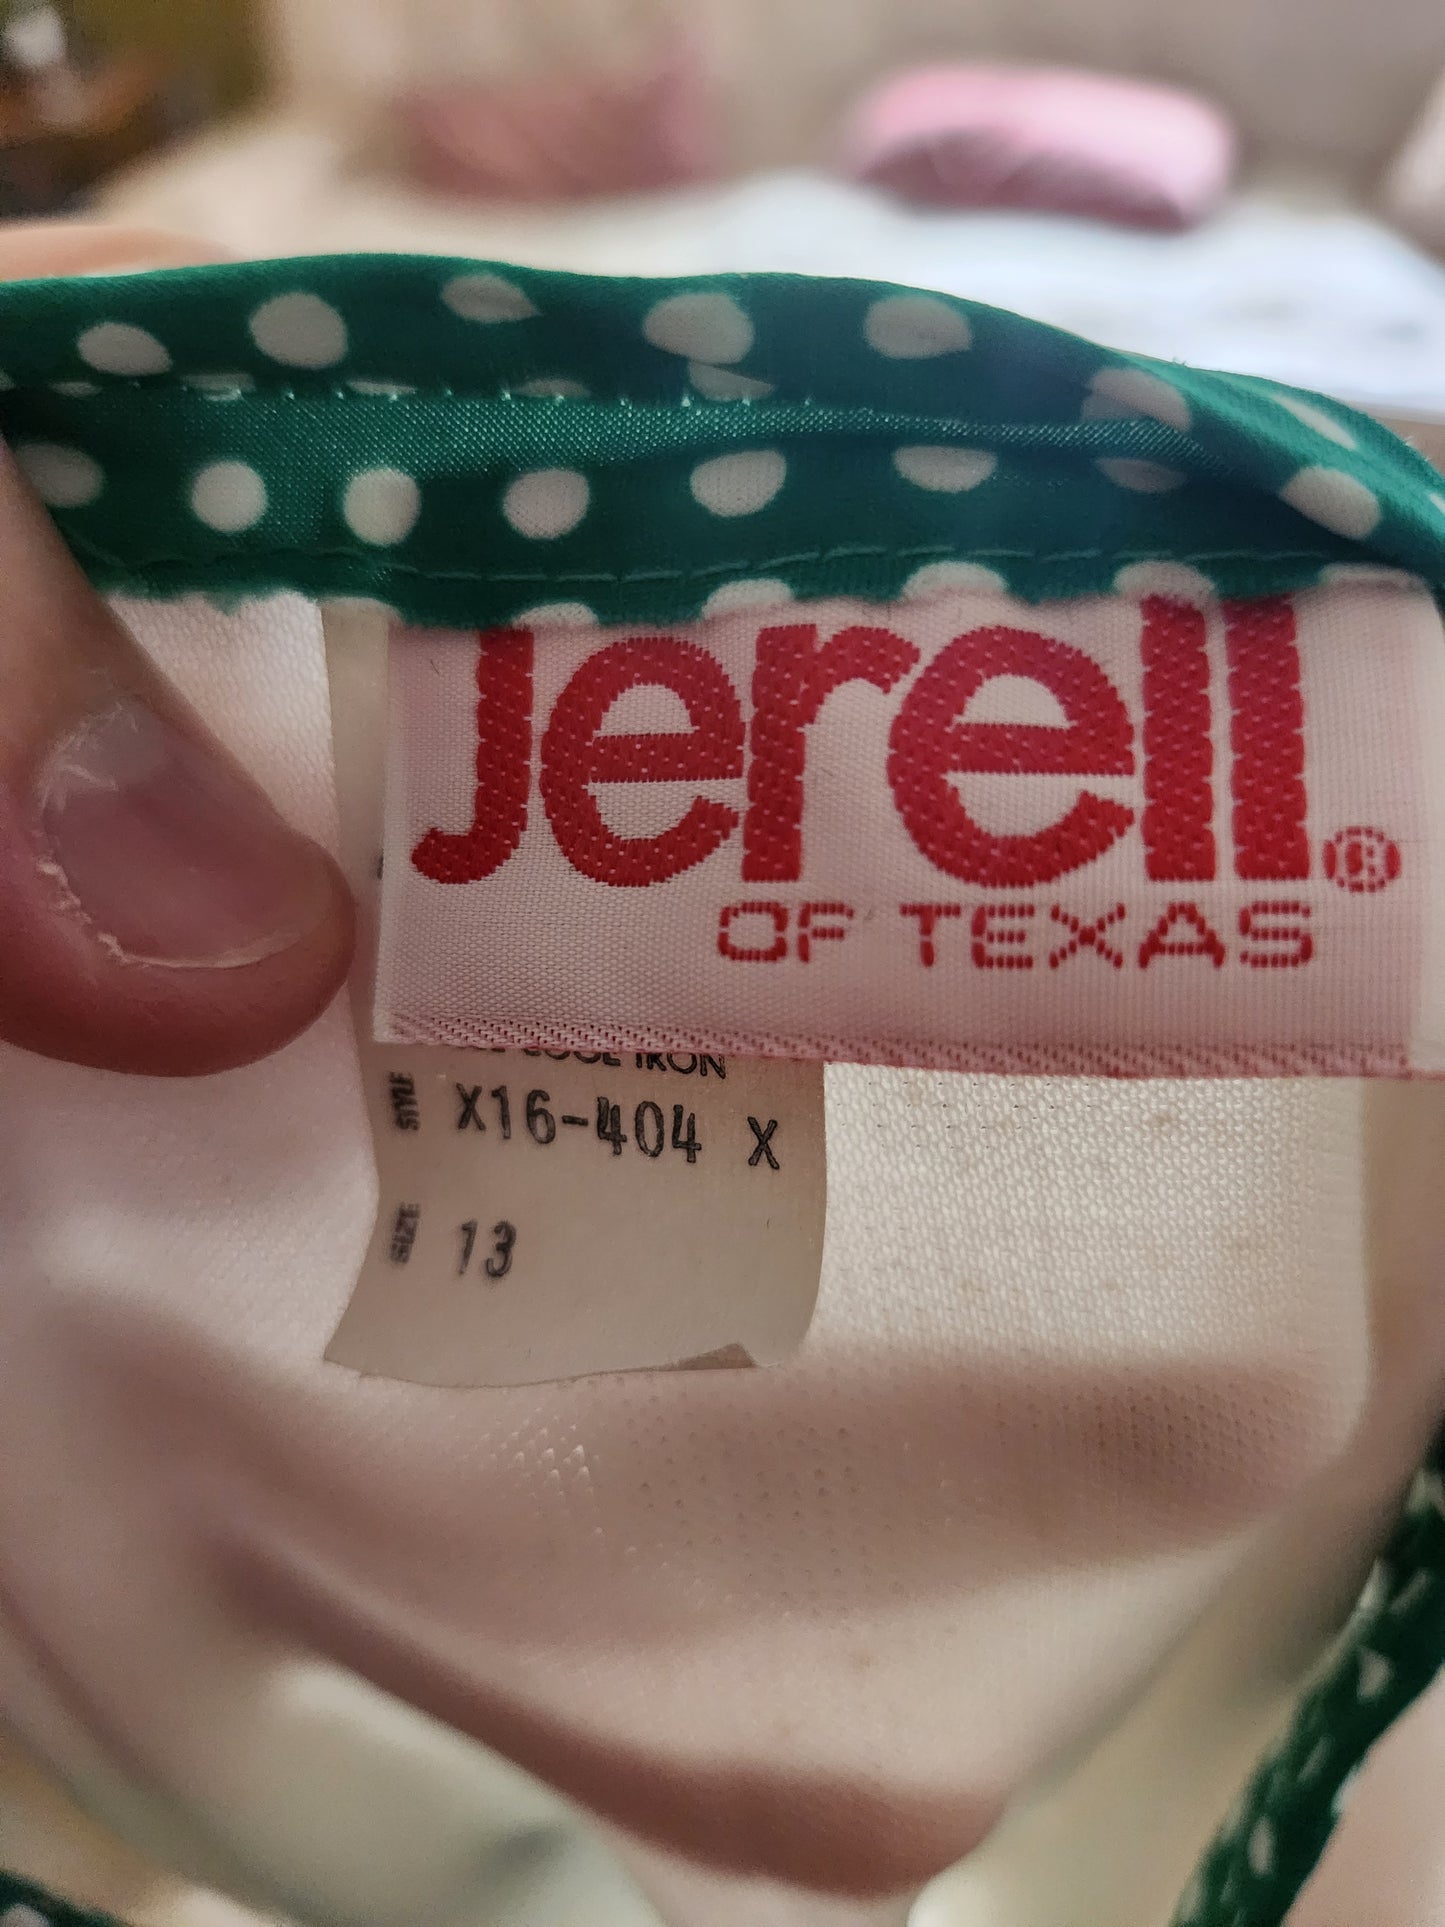 Vintage Sleeveless Dress by Jerell of Texas